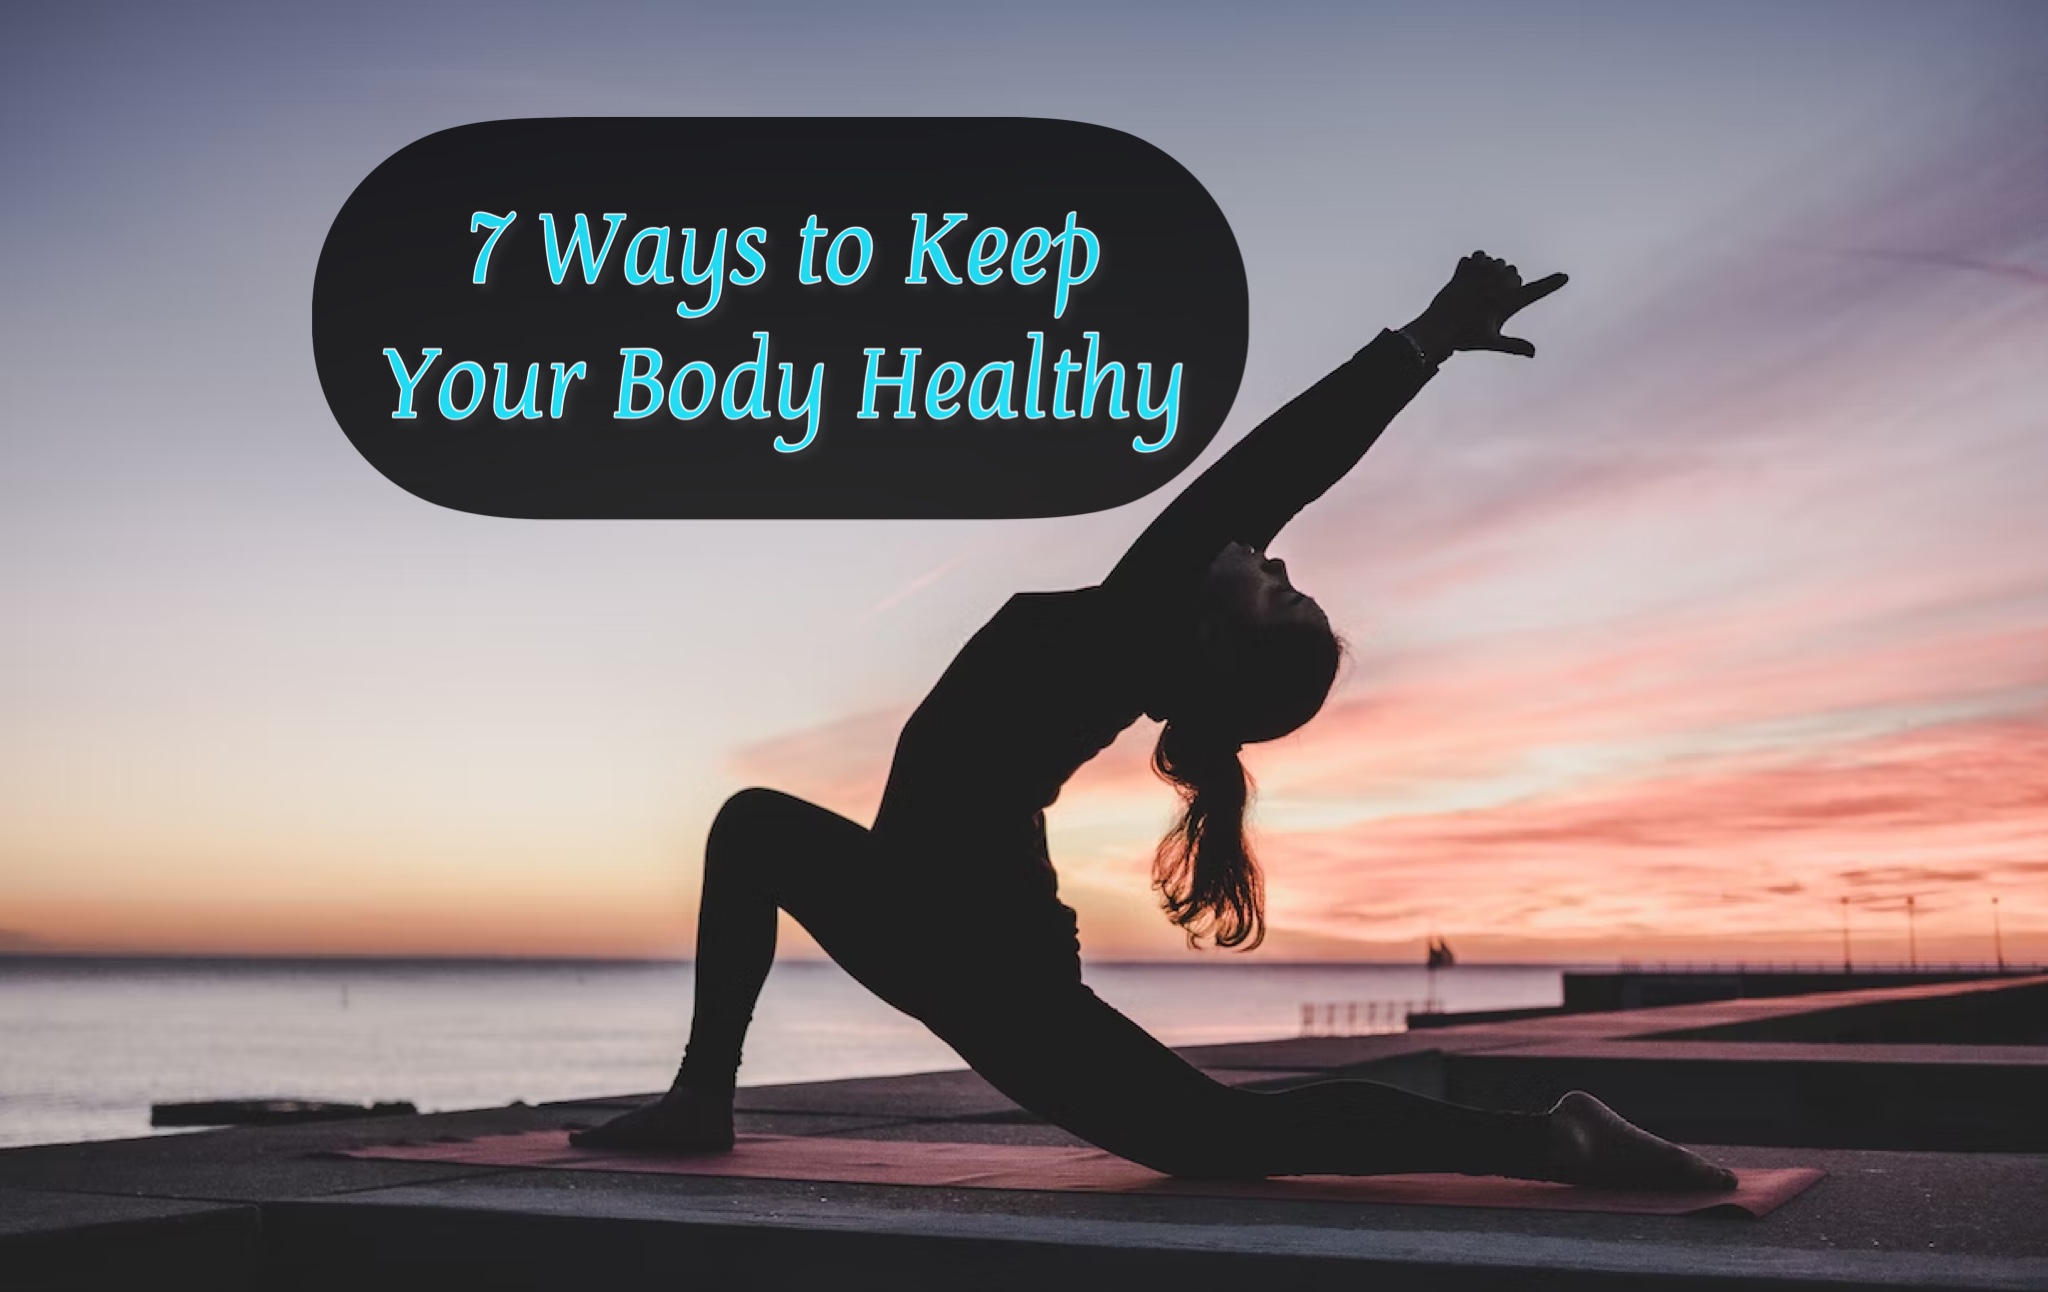 7 Ways to Keep Your Body Healthy